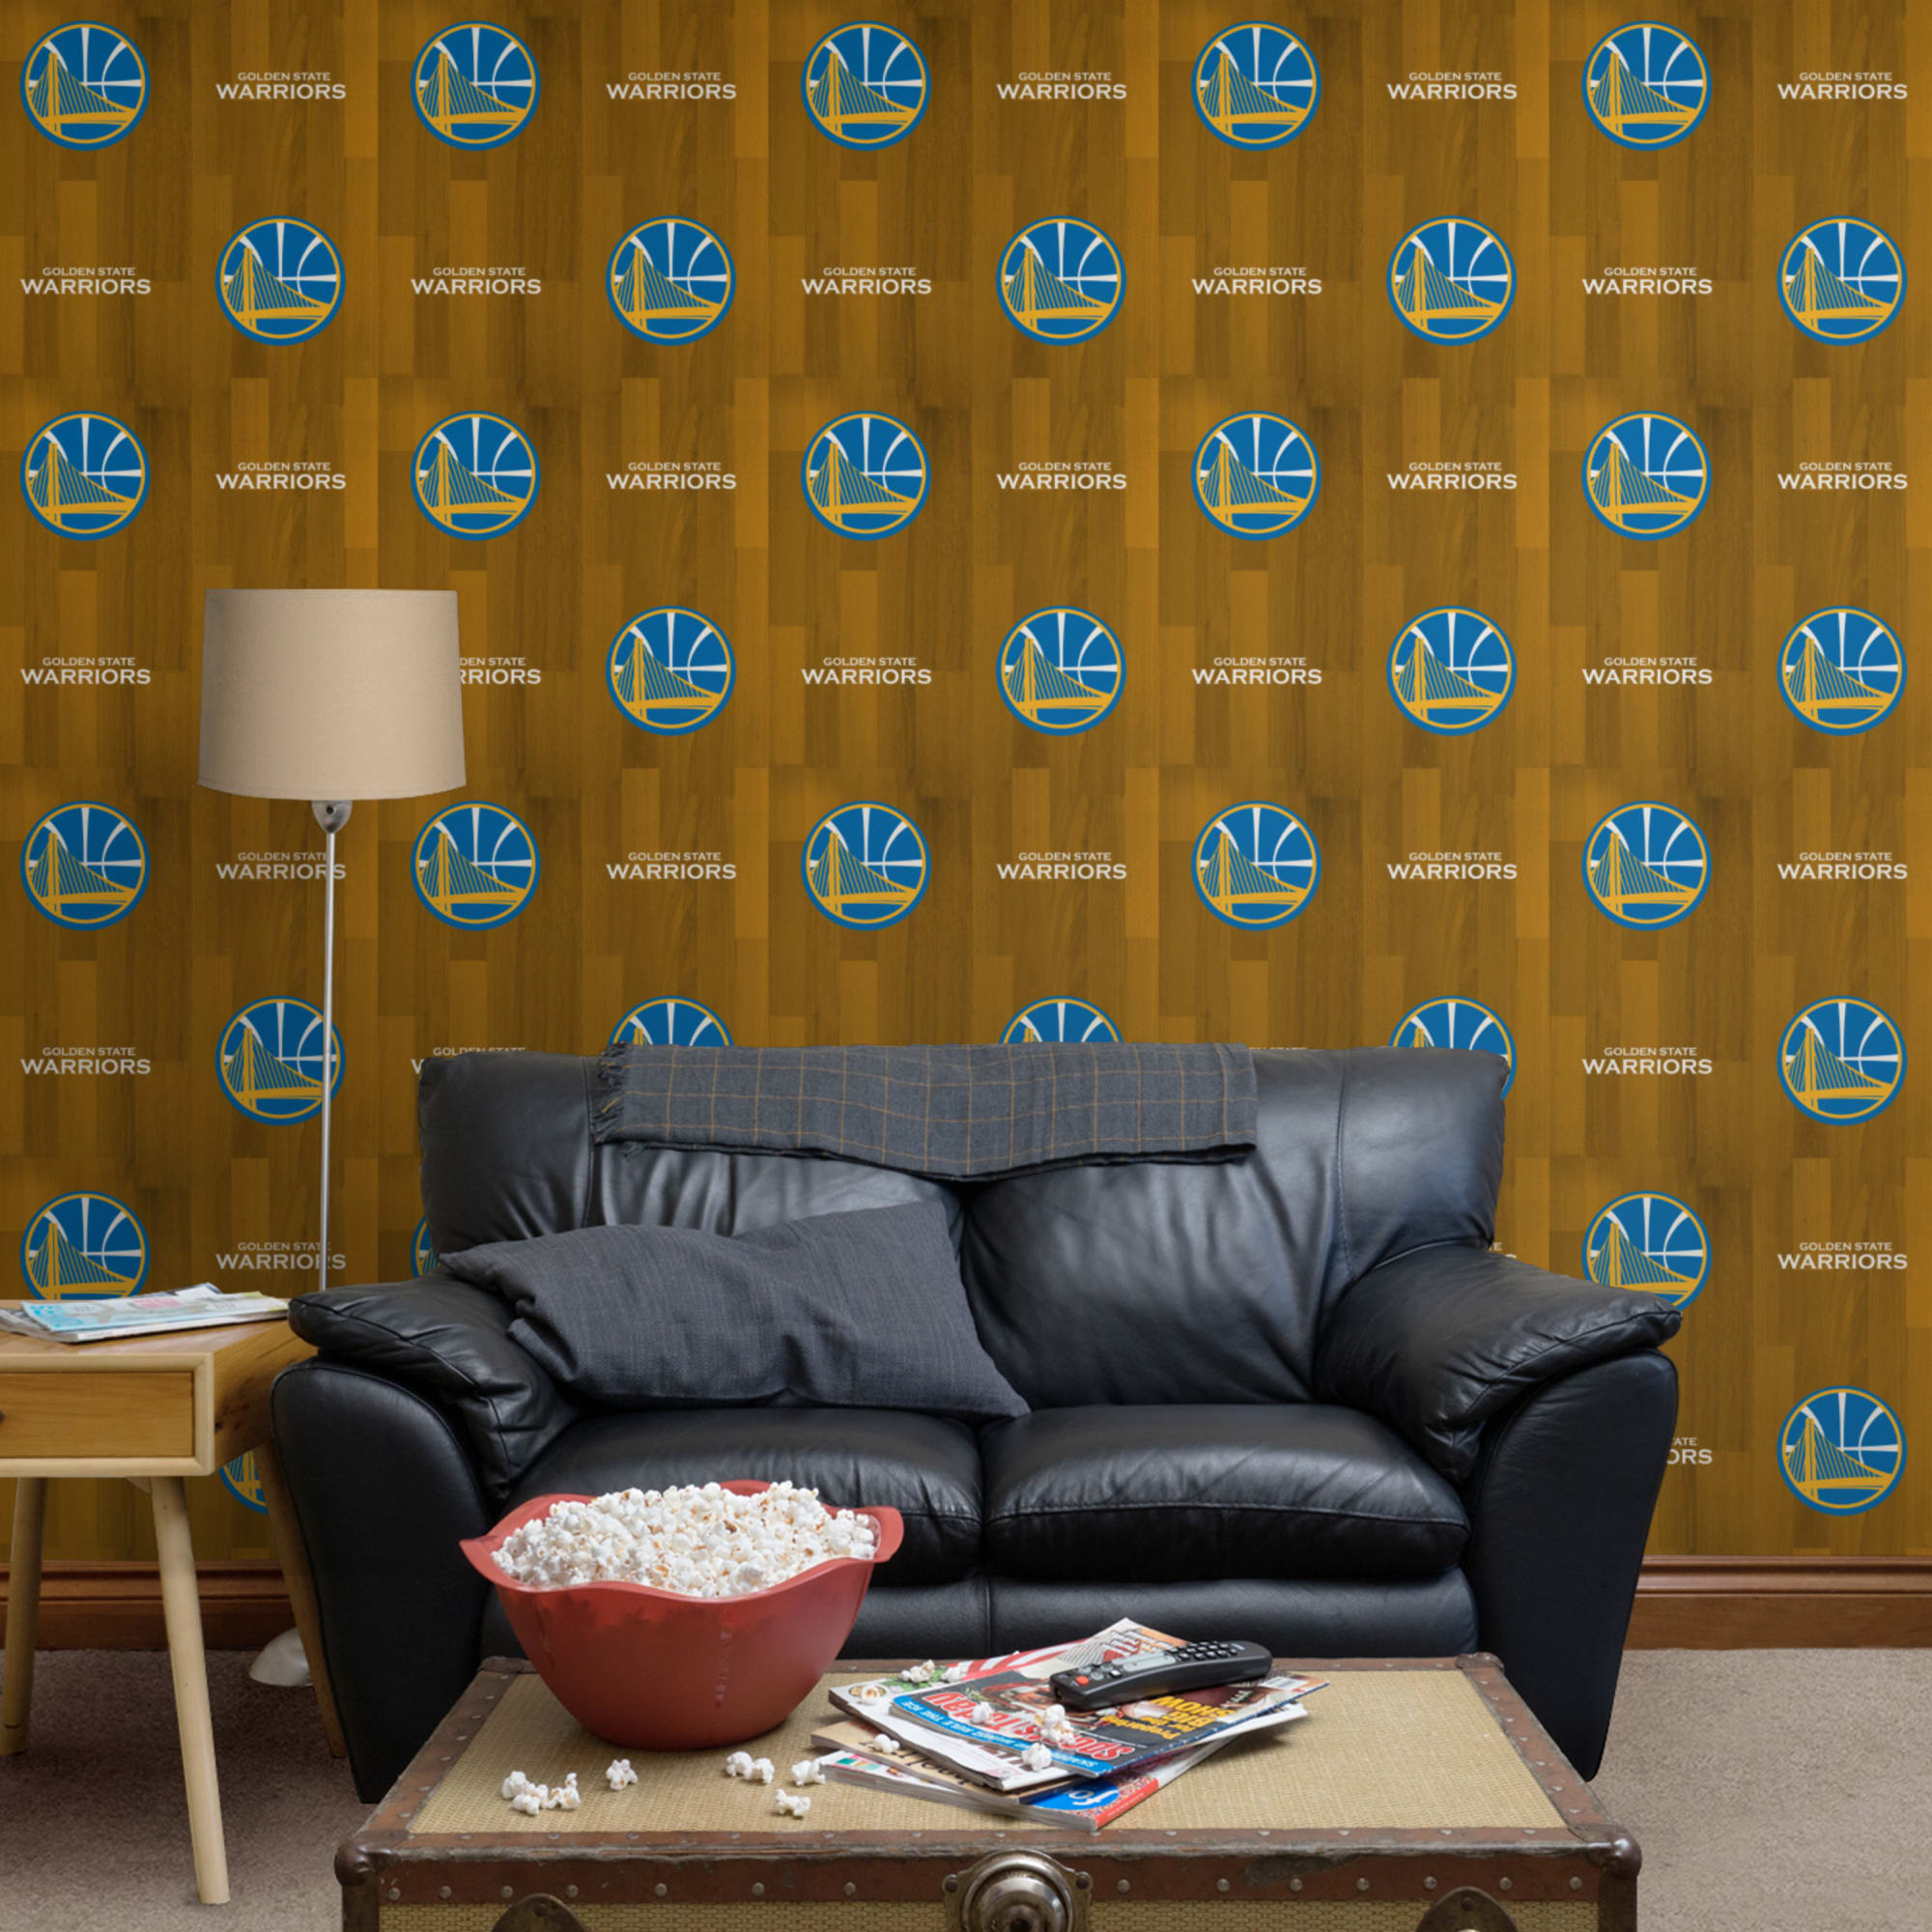 Golden State Warriors: Hardwood Pattern - Officially Licensed Removable Wallpaper 12" x 12" Sample by Fathead